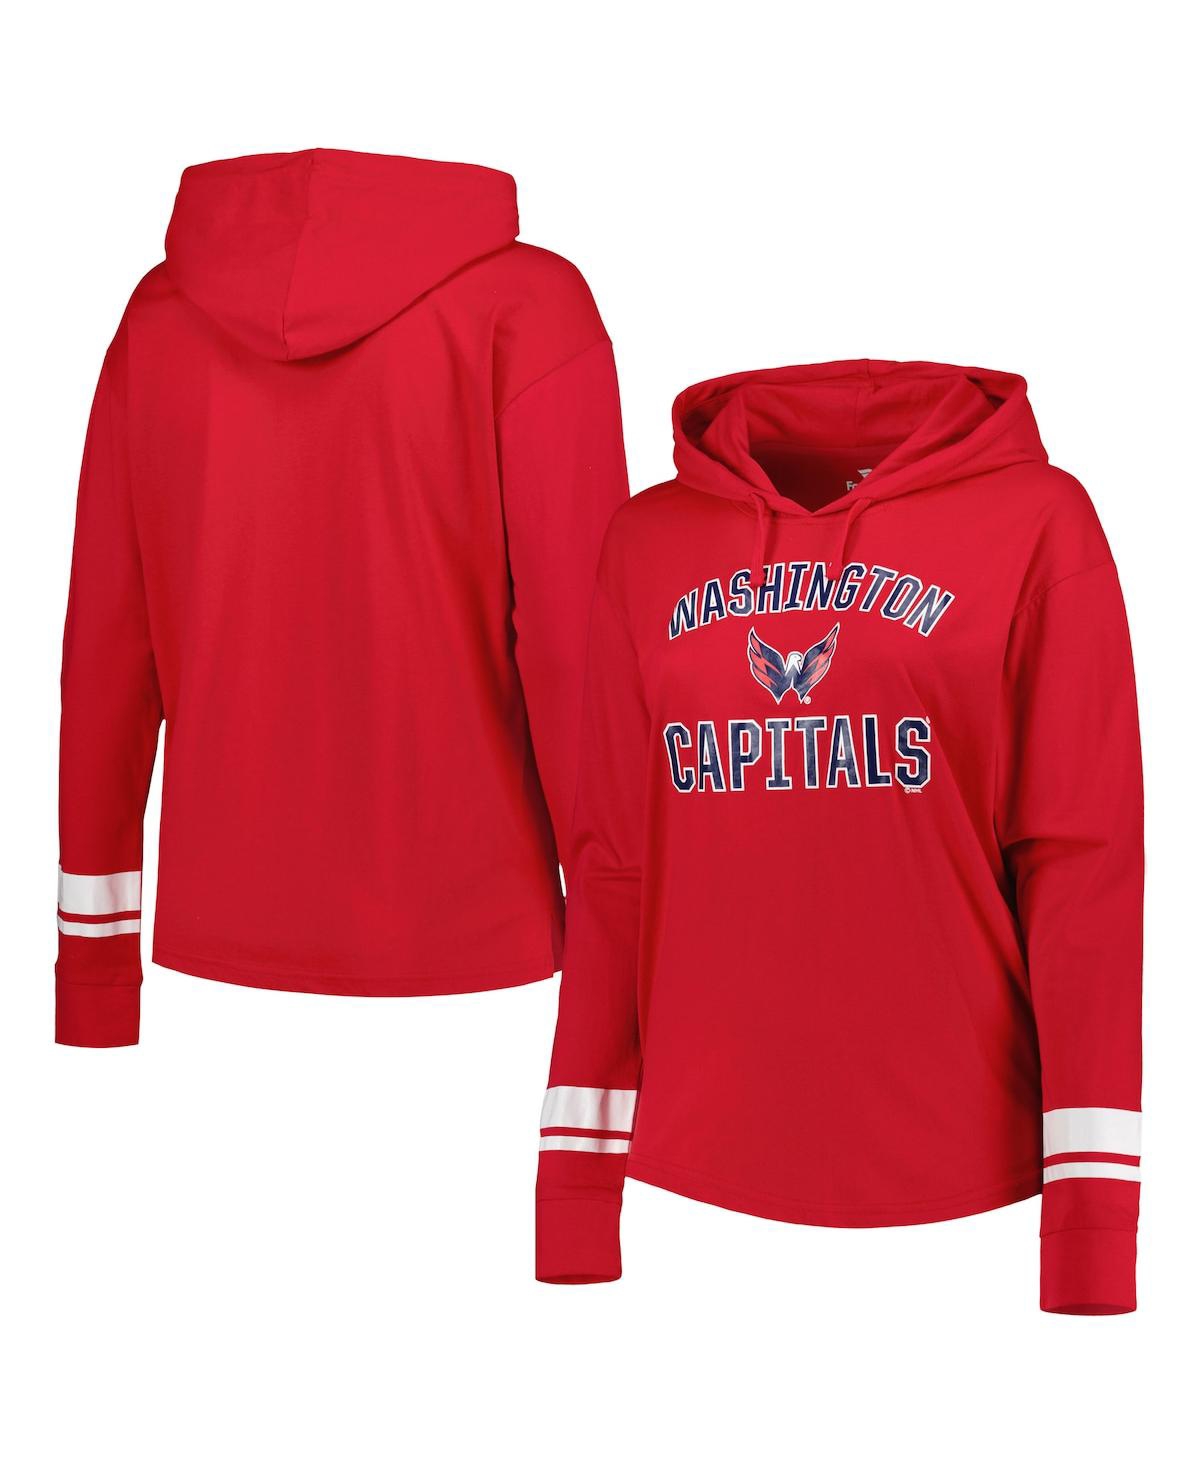 Women's Red Washington Capitals Colorblock Plus Size Pullover Hoodie Jacket - Red